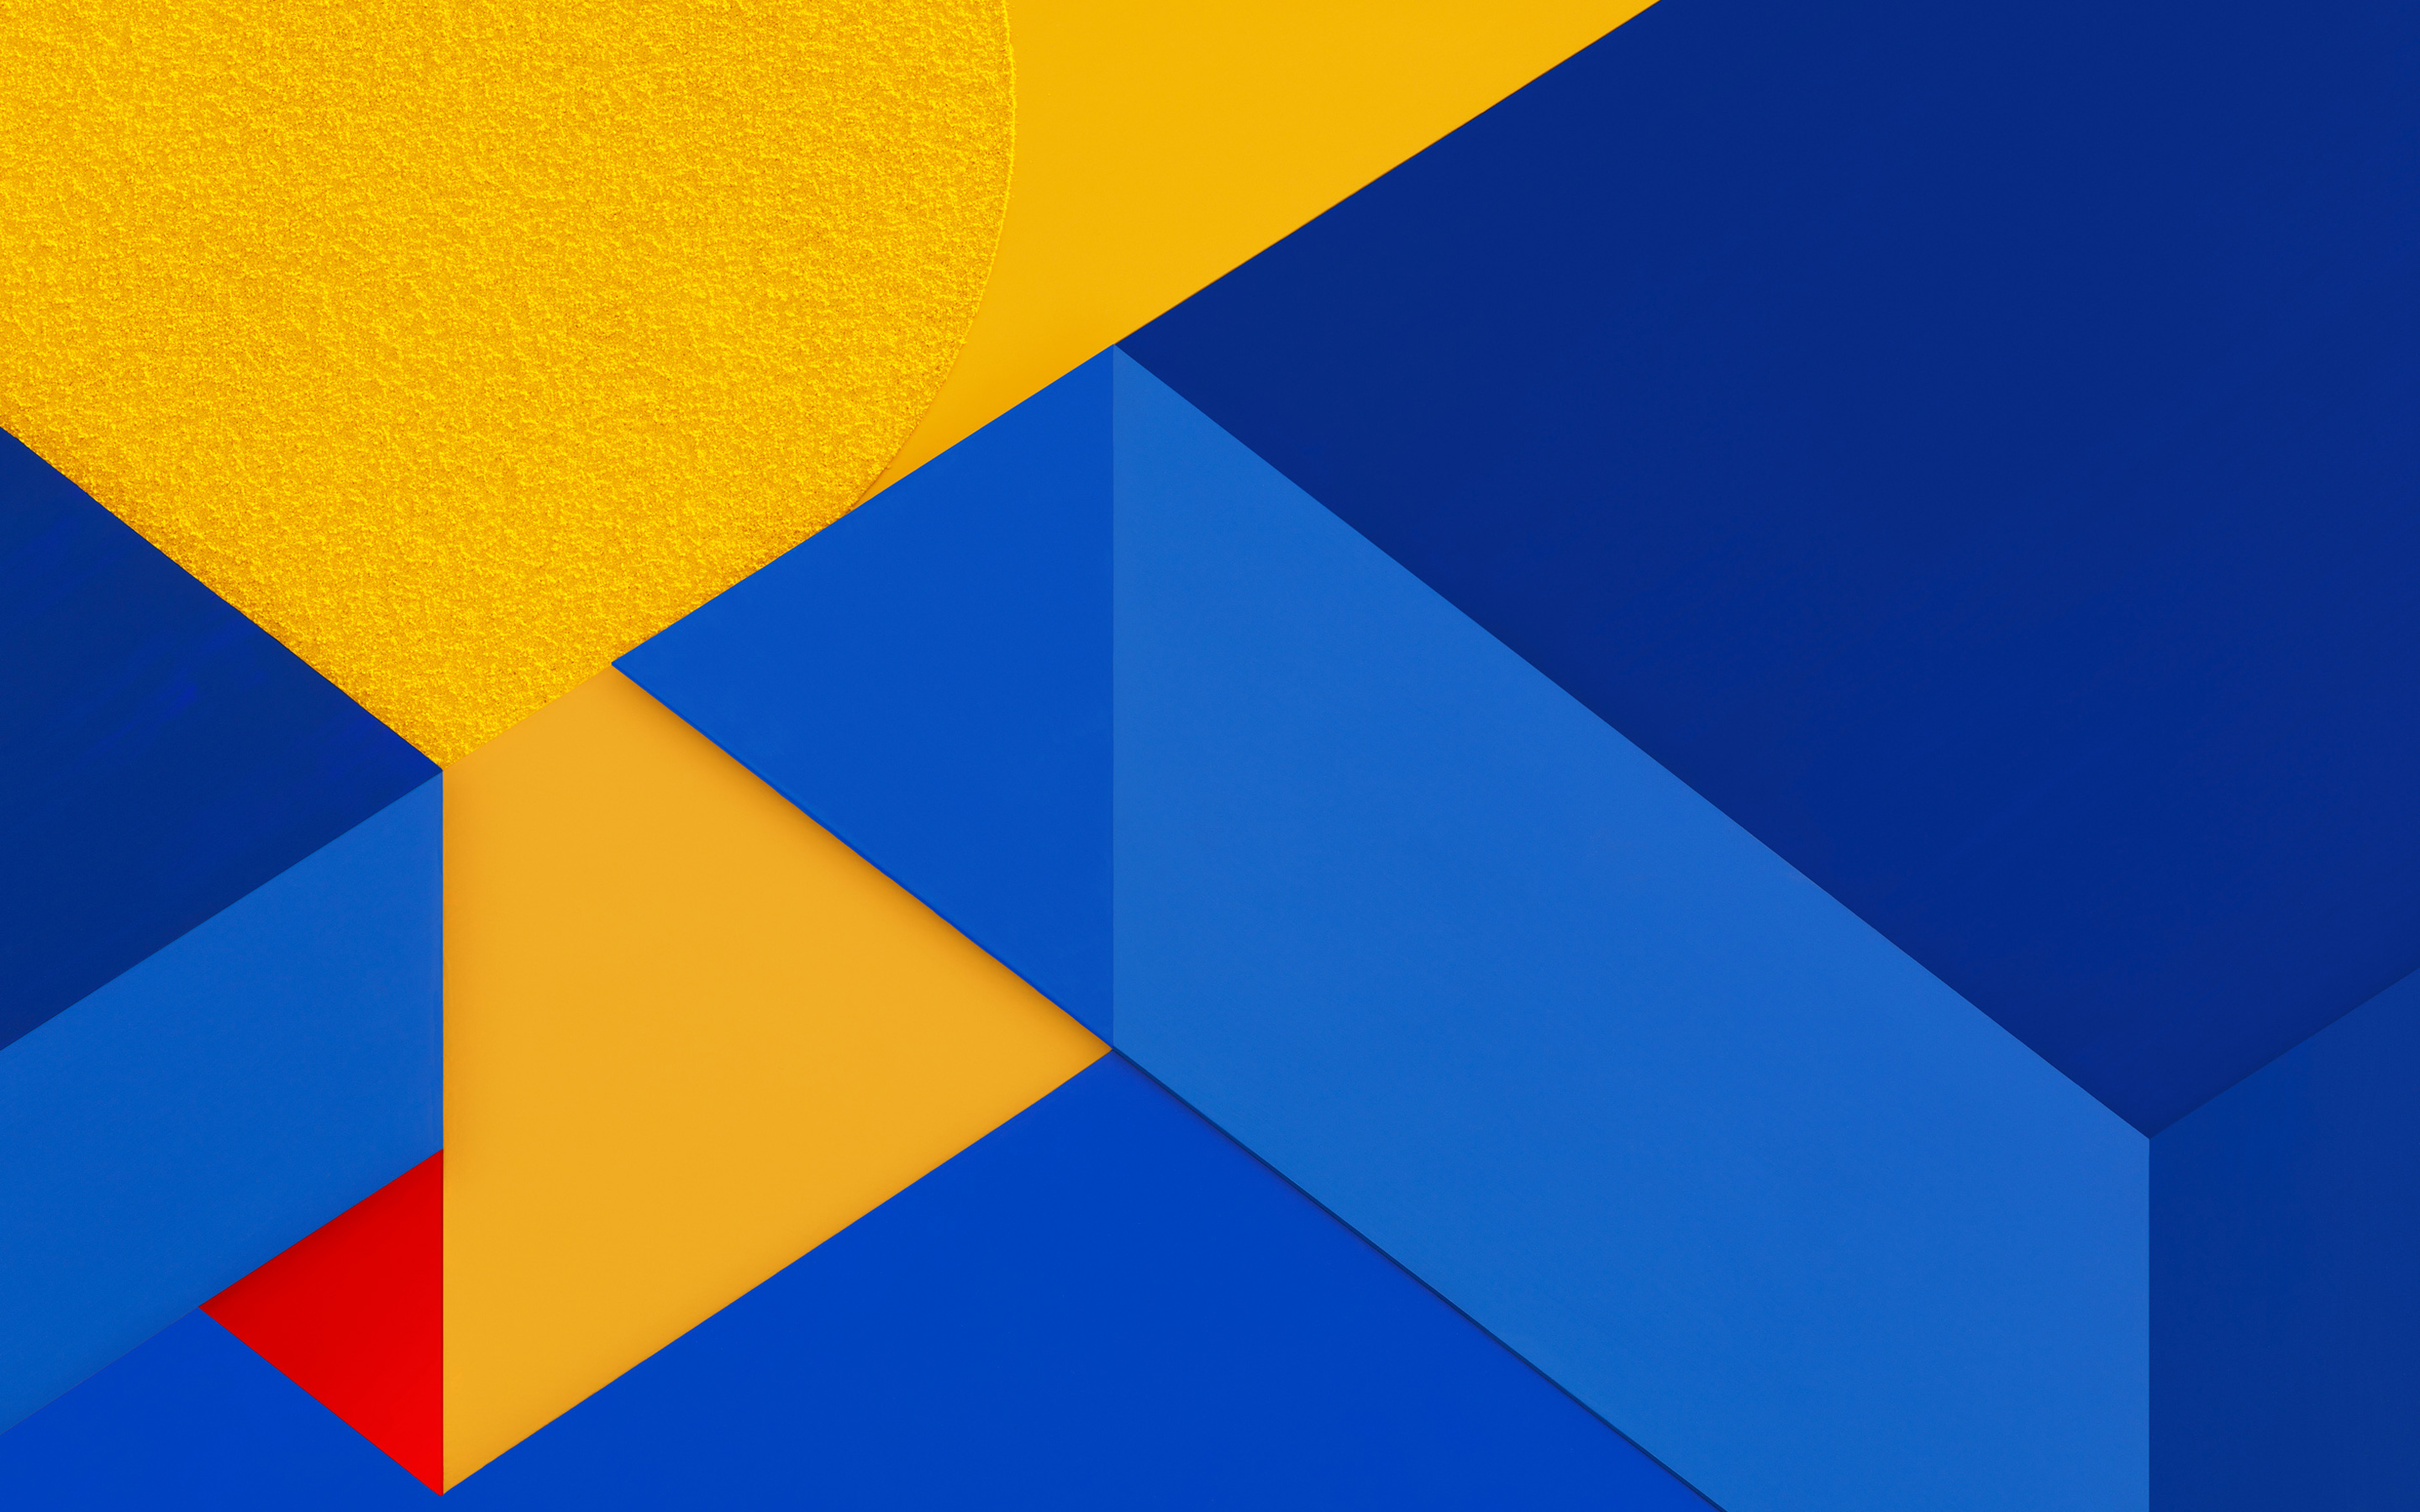 Download wallpapers yellow blue abstraction, lines, geometric backgrounds,  Android Marshmallow for desktop with resolution 2880x1800. High Quality HD  pictures wallpapers